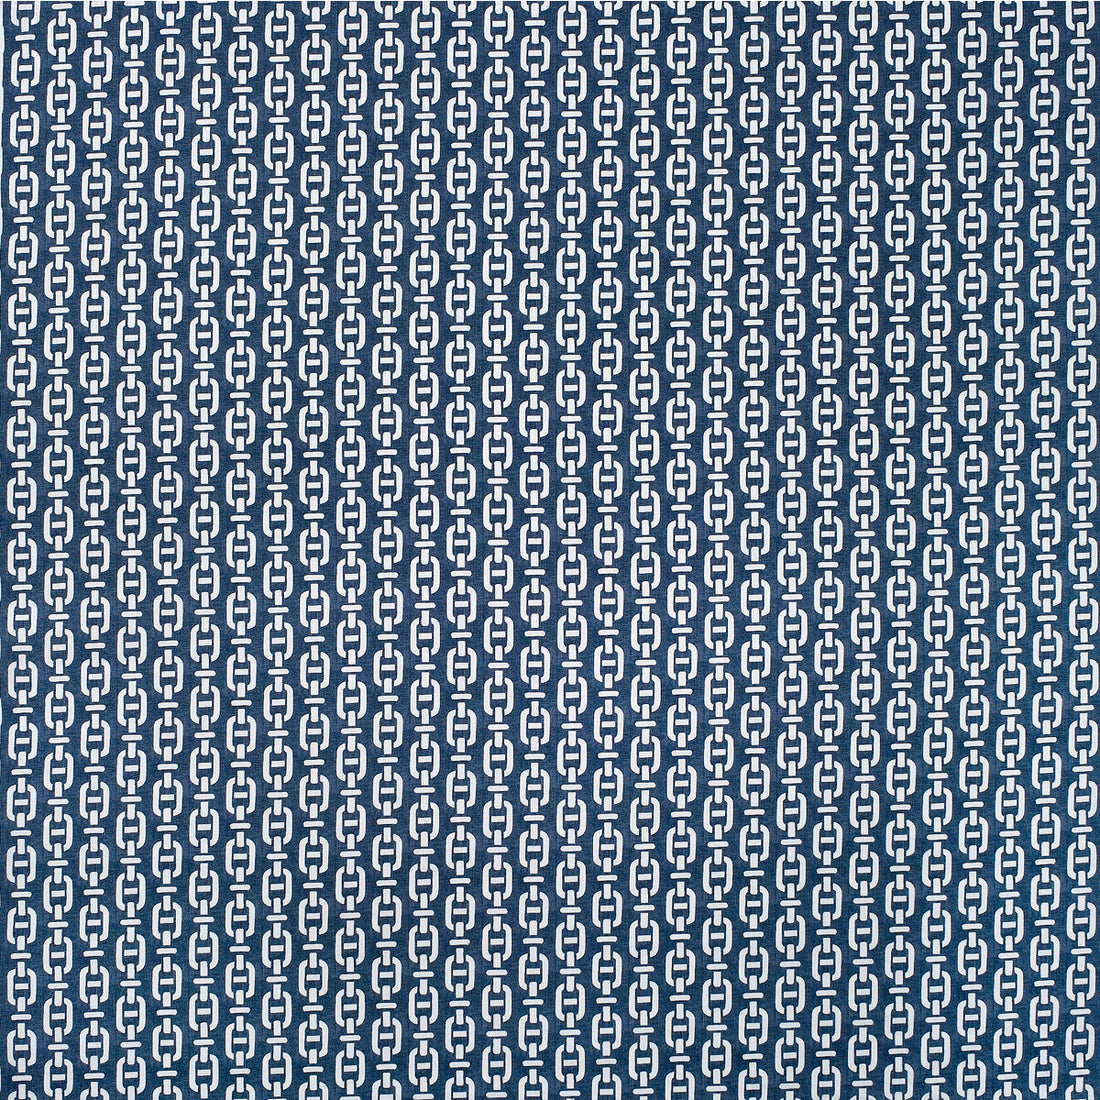 Burlington Outdoor fabric in navy color - pattern AM100387.550.0 - by Kravet Couture in the Andrew Martin Sophie Patterson Outdoor collection